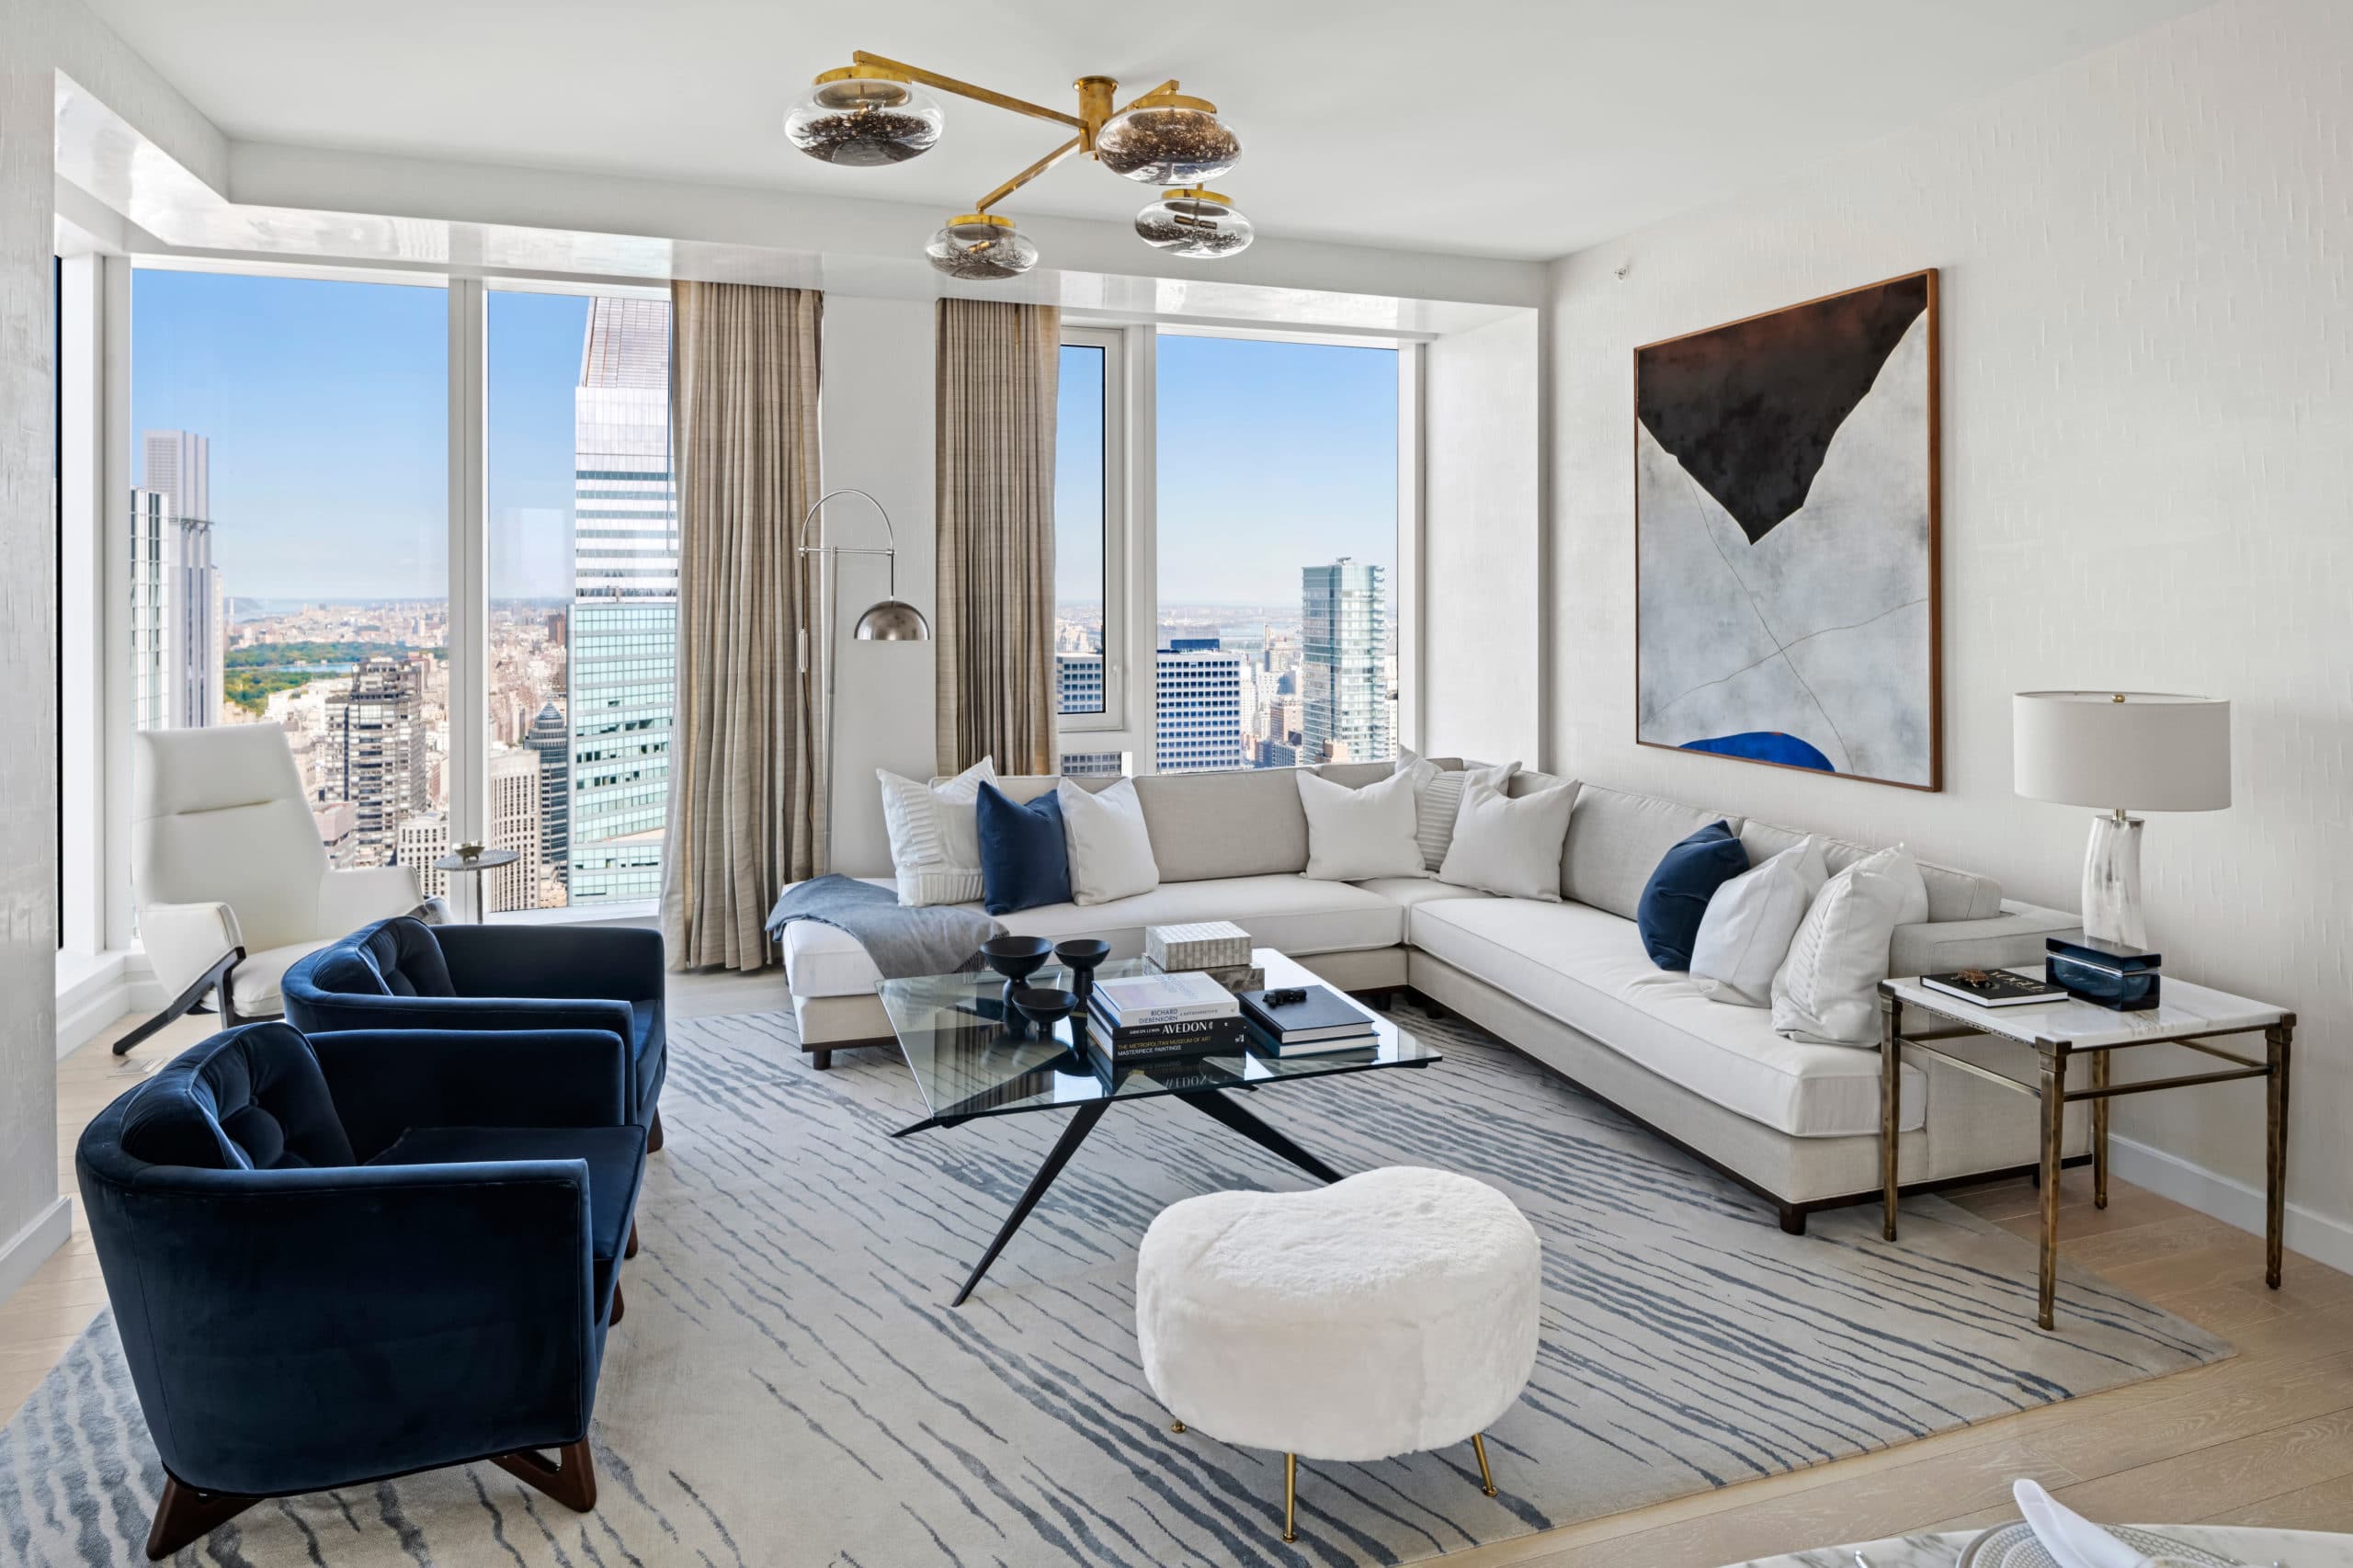 Corner living room with floor-to-ceiling windows, blue chairs, and a white couch overlooking New York at The Centrale condos.